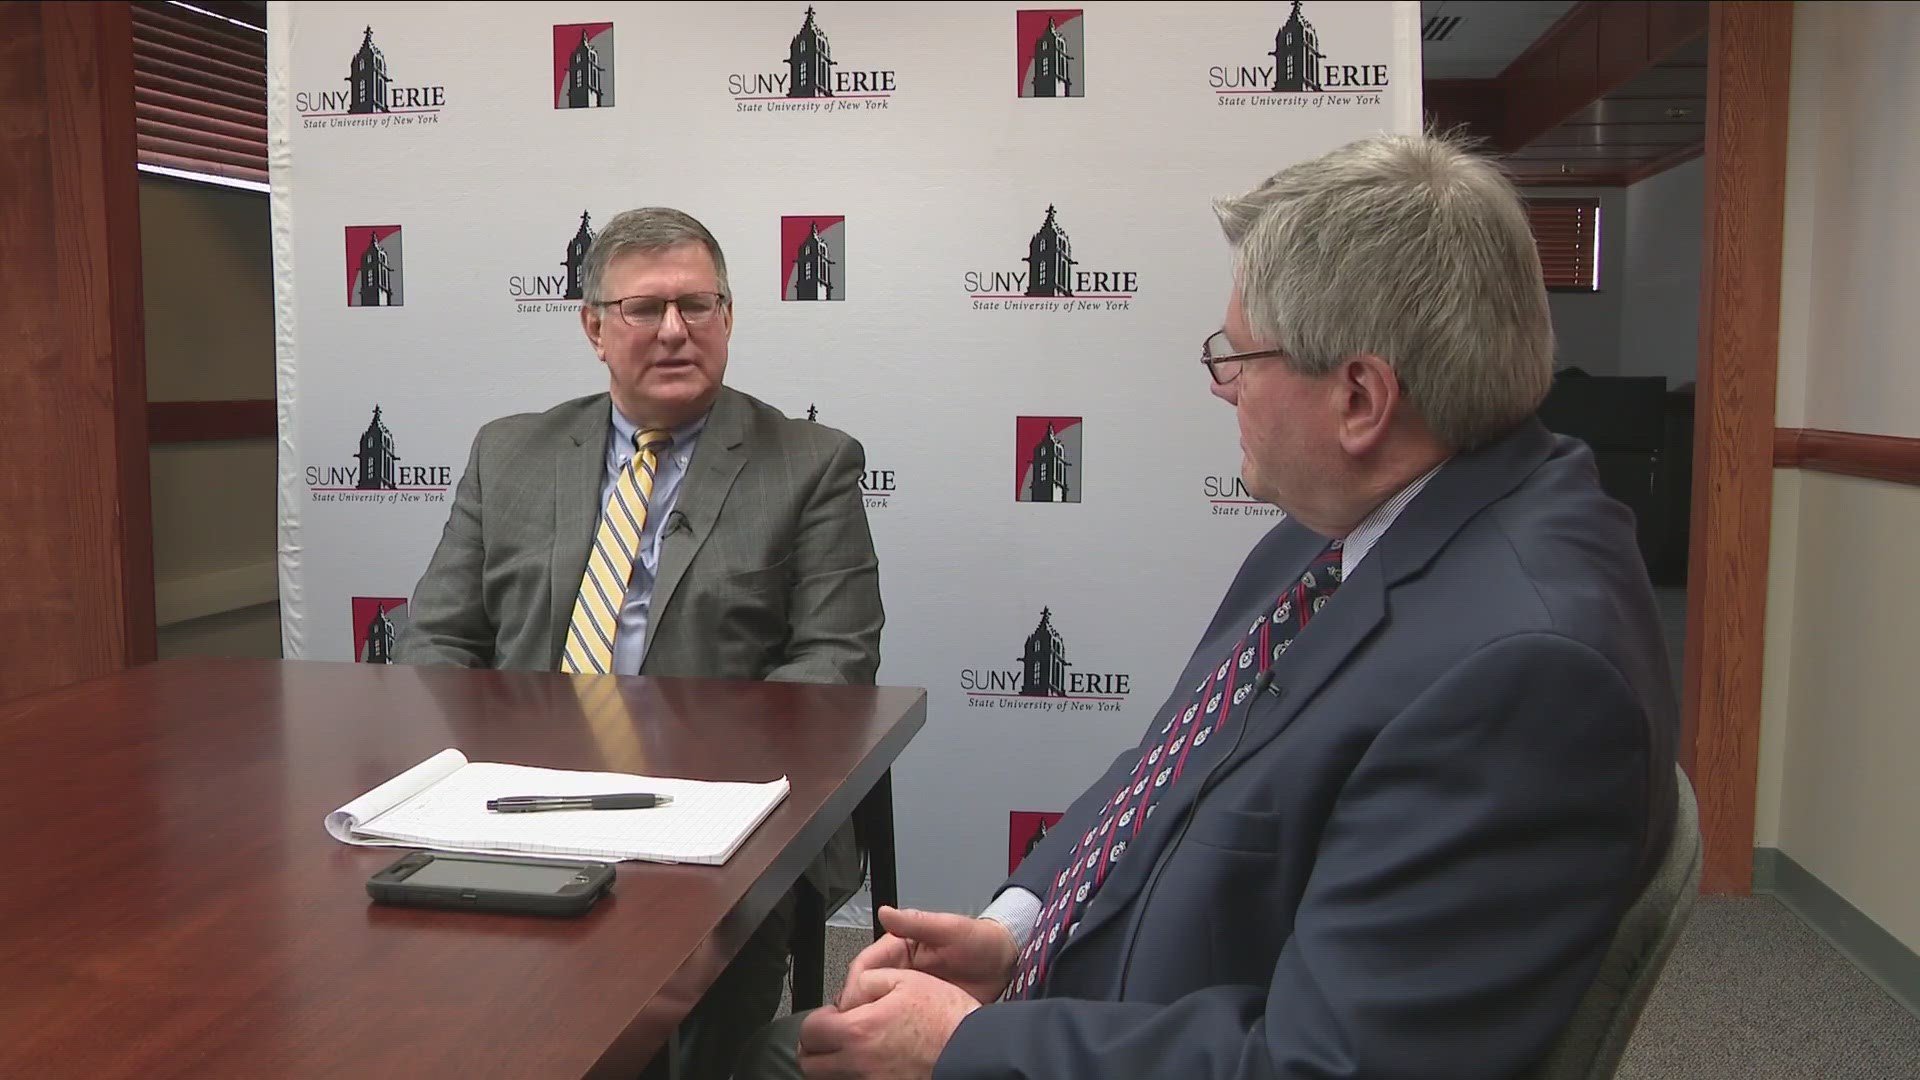 Channel 2's Ron Plants sat down today with the Chairman of the Board of Trustees to see where things stand and plans for the future with a new college president...